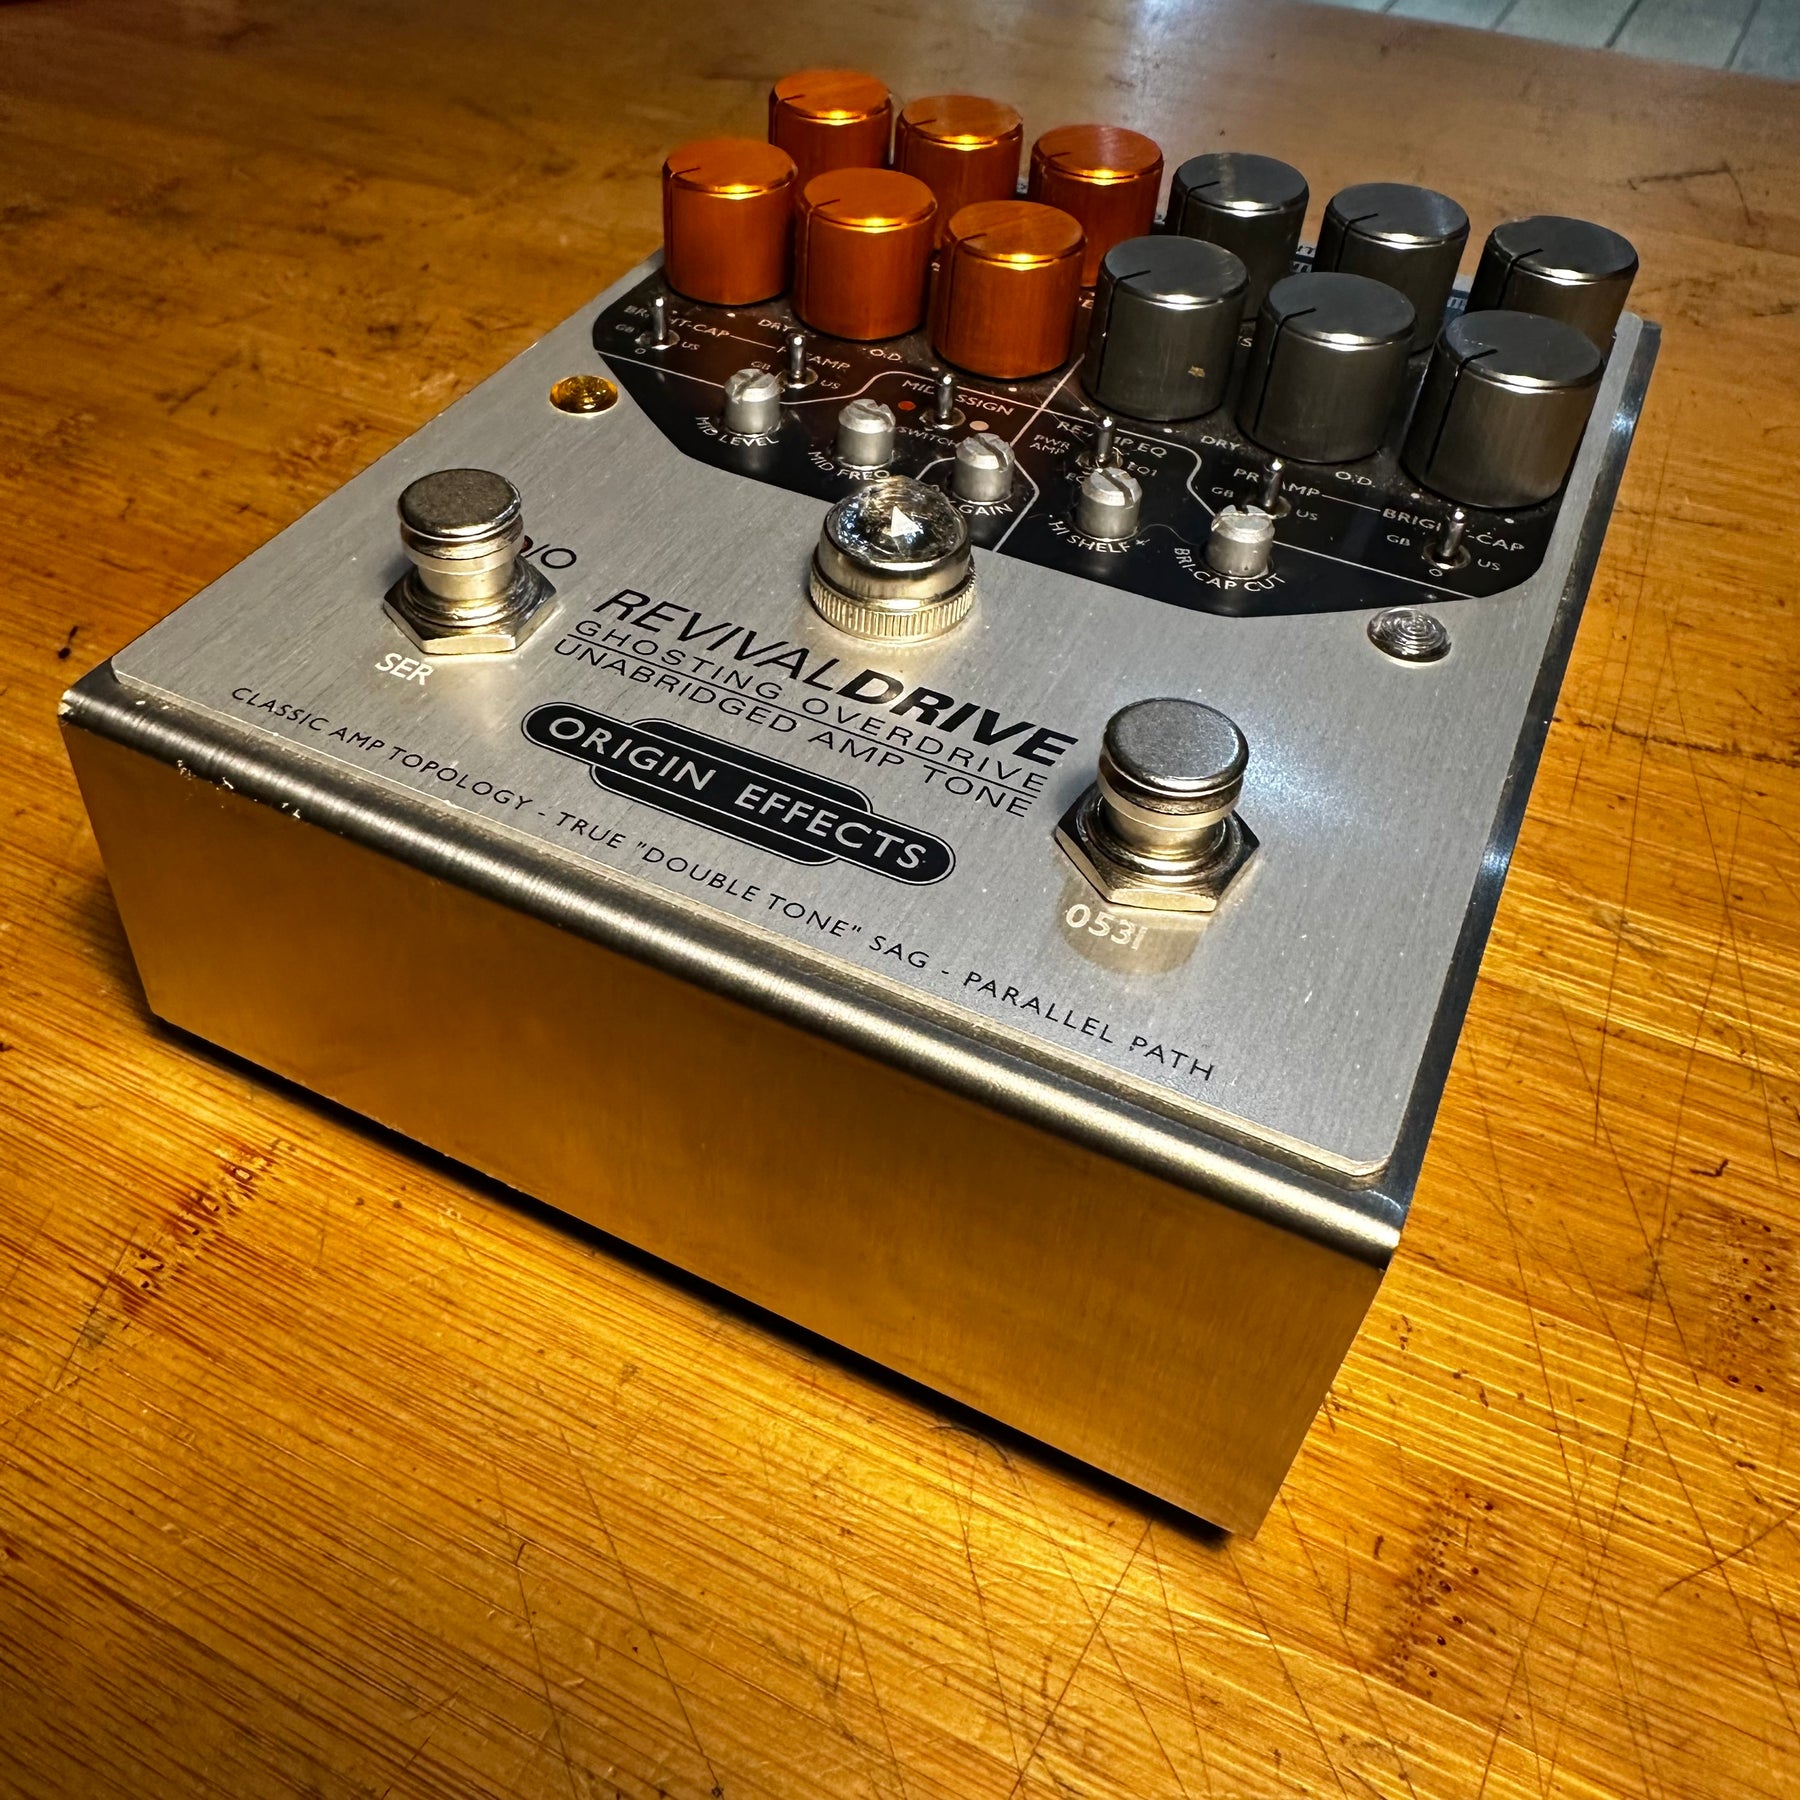 Origin Effects Revival Drive Ghosting Amplifier - Preowned